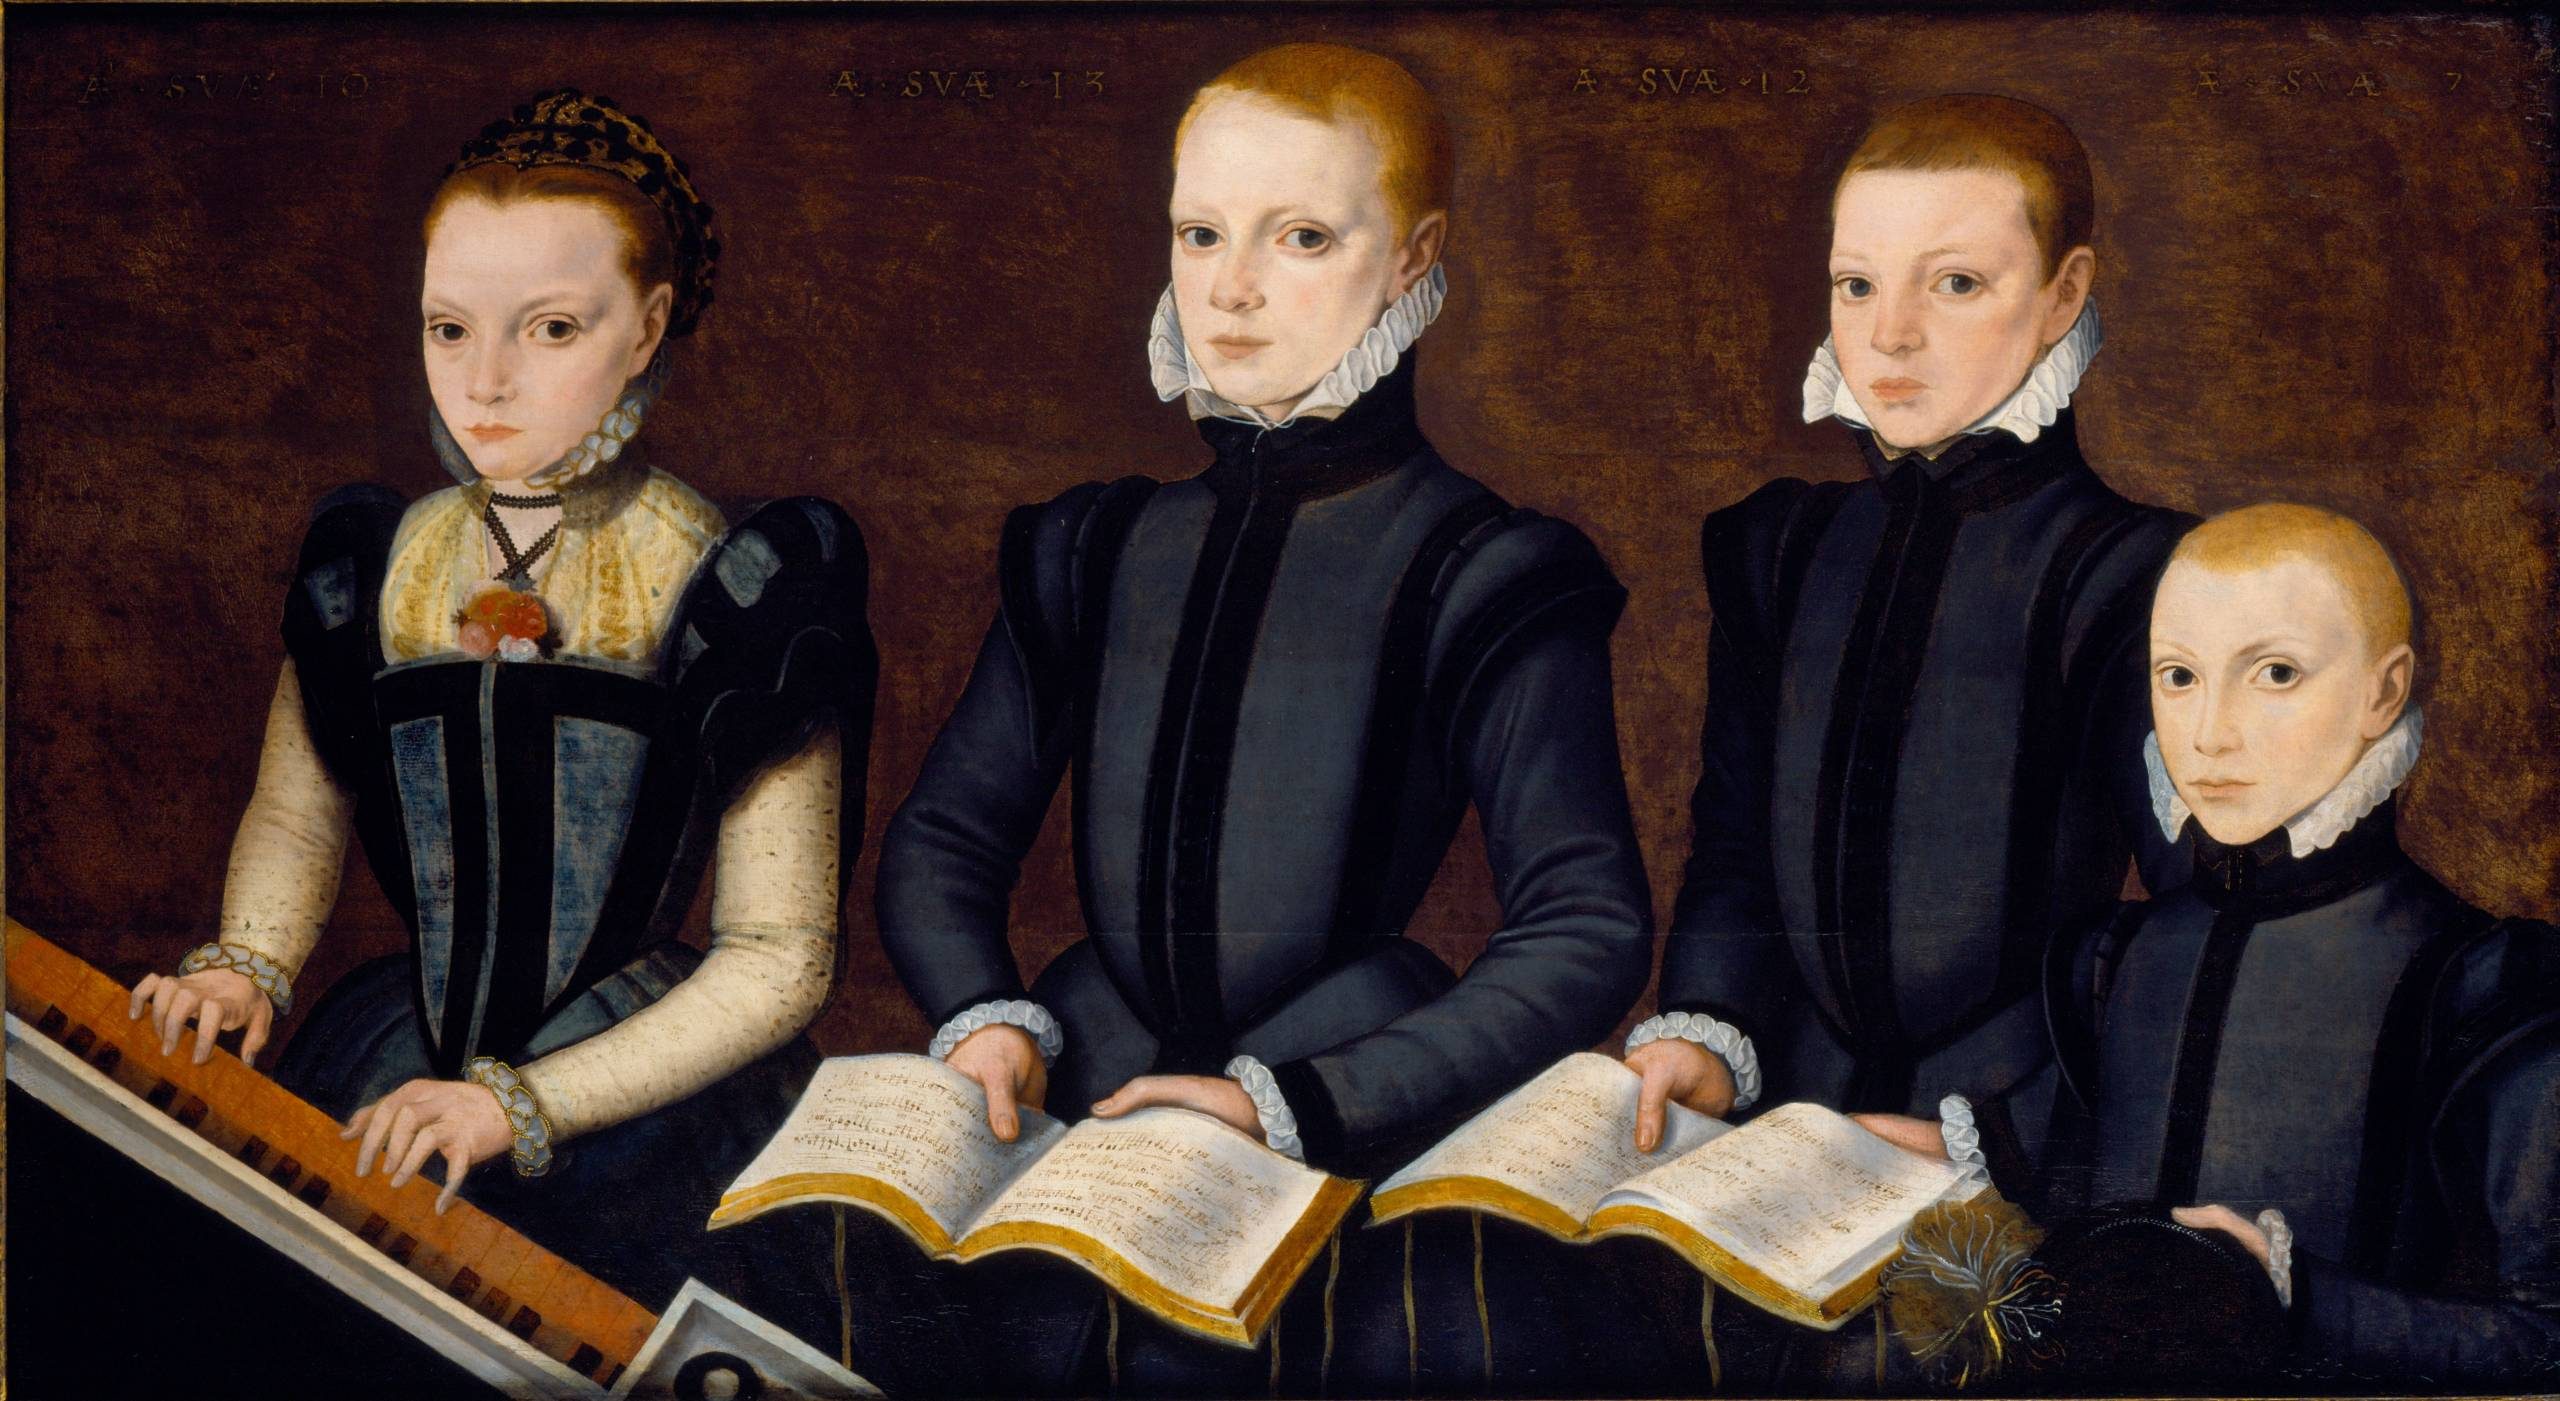 A Tudor painting of a girl and three boys. The girl is playing a piano and the boys are holding music books. They all look very serious and are in dark clothing.